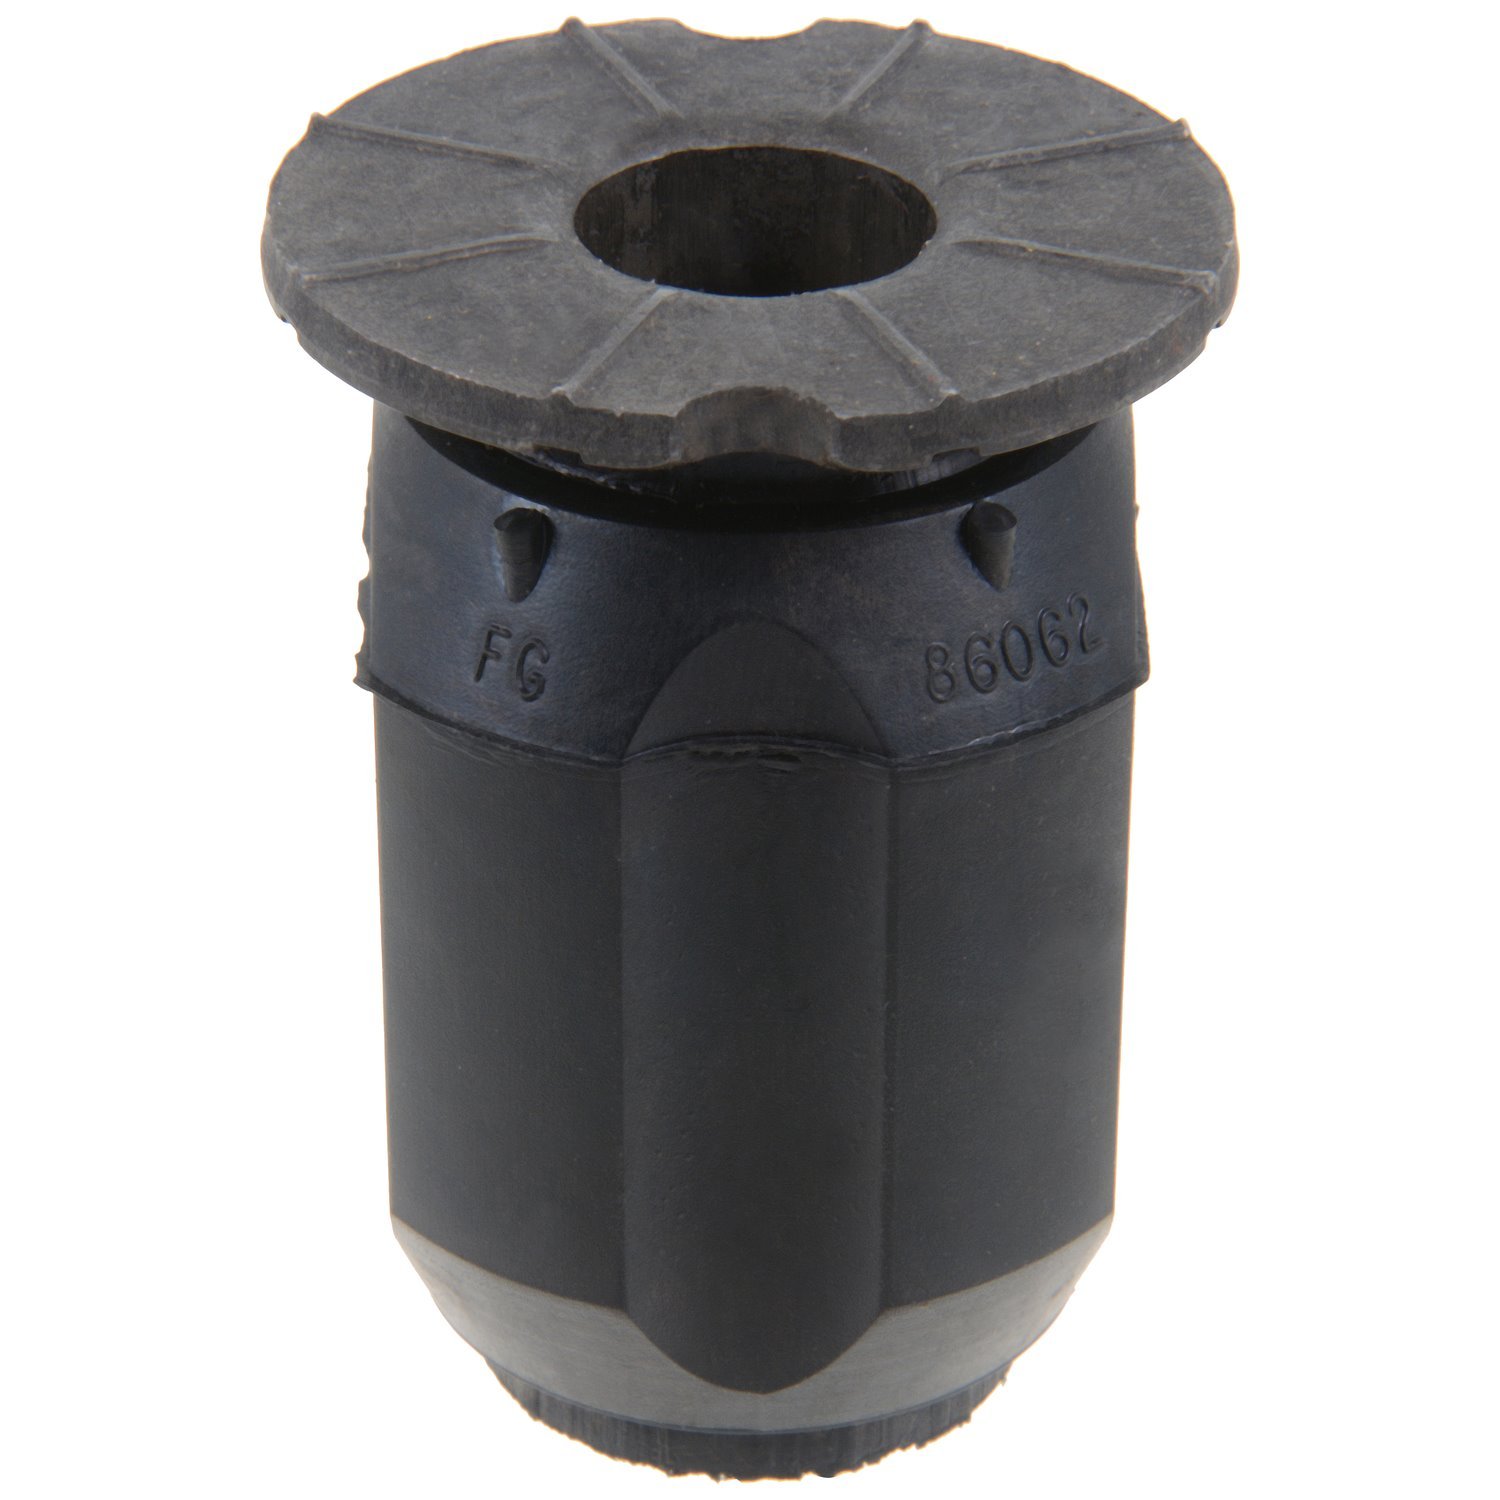 JBU2126 Rack and Pinion Mount Bushing Fits Select Chevrolet Models, Position: Left/Driver or Right/Passenger